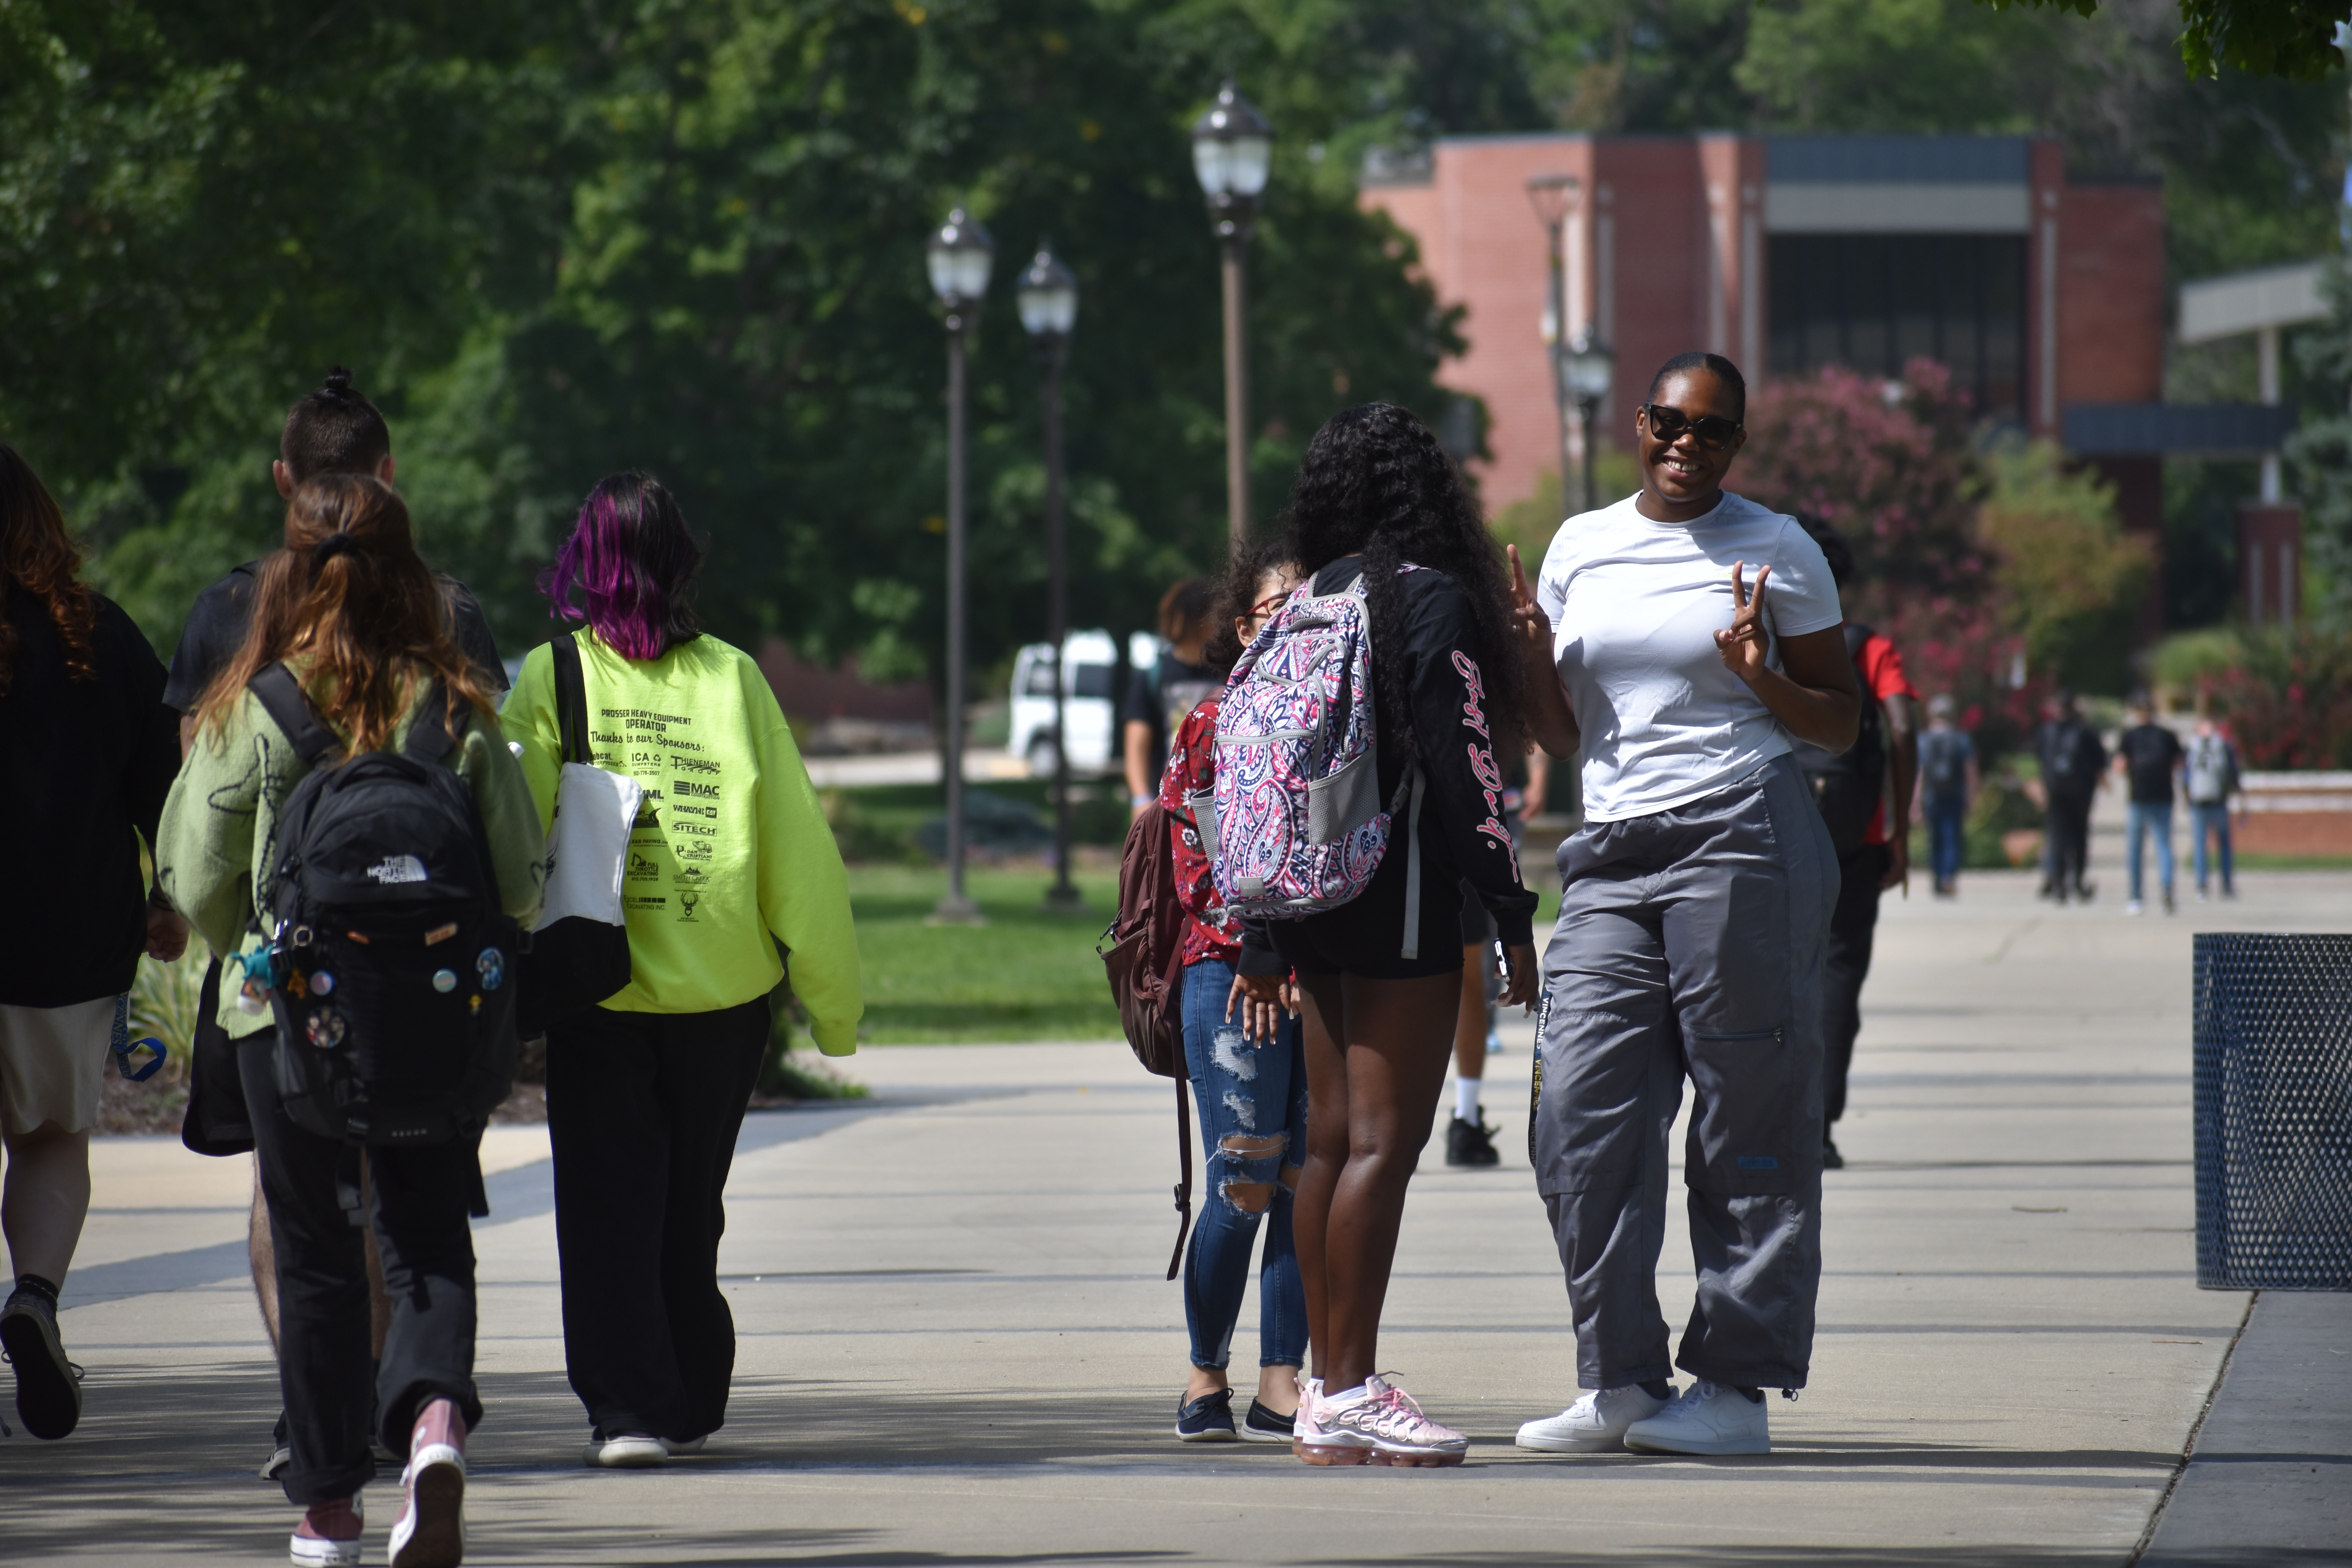 A female student flashes a peace sign on a campus walkway with many students surrounding her.